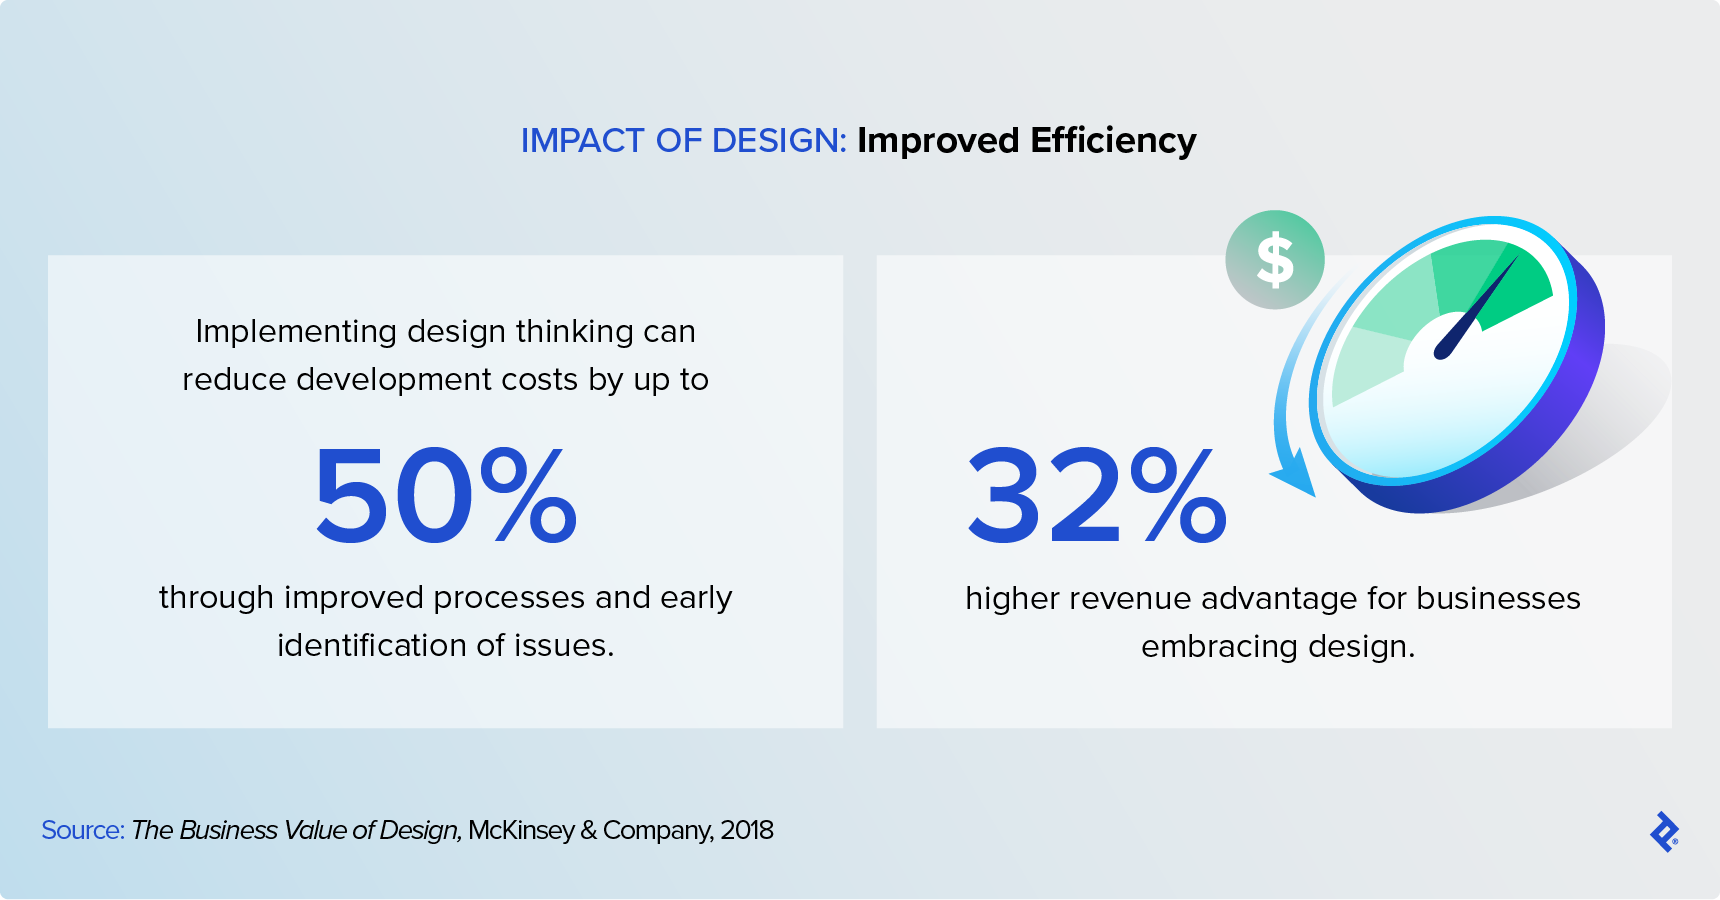 Design thinking can reduce development cost and time to market for new products and services.